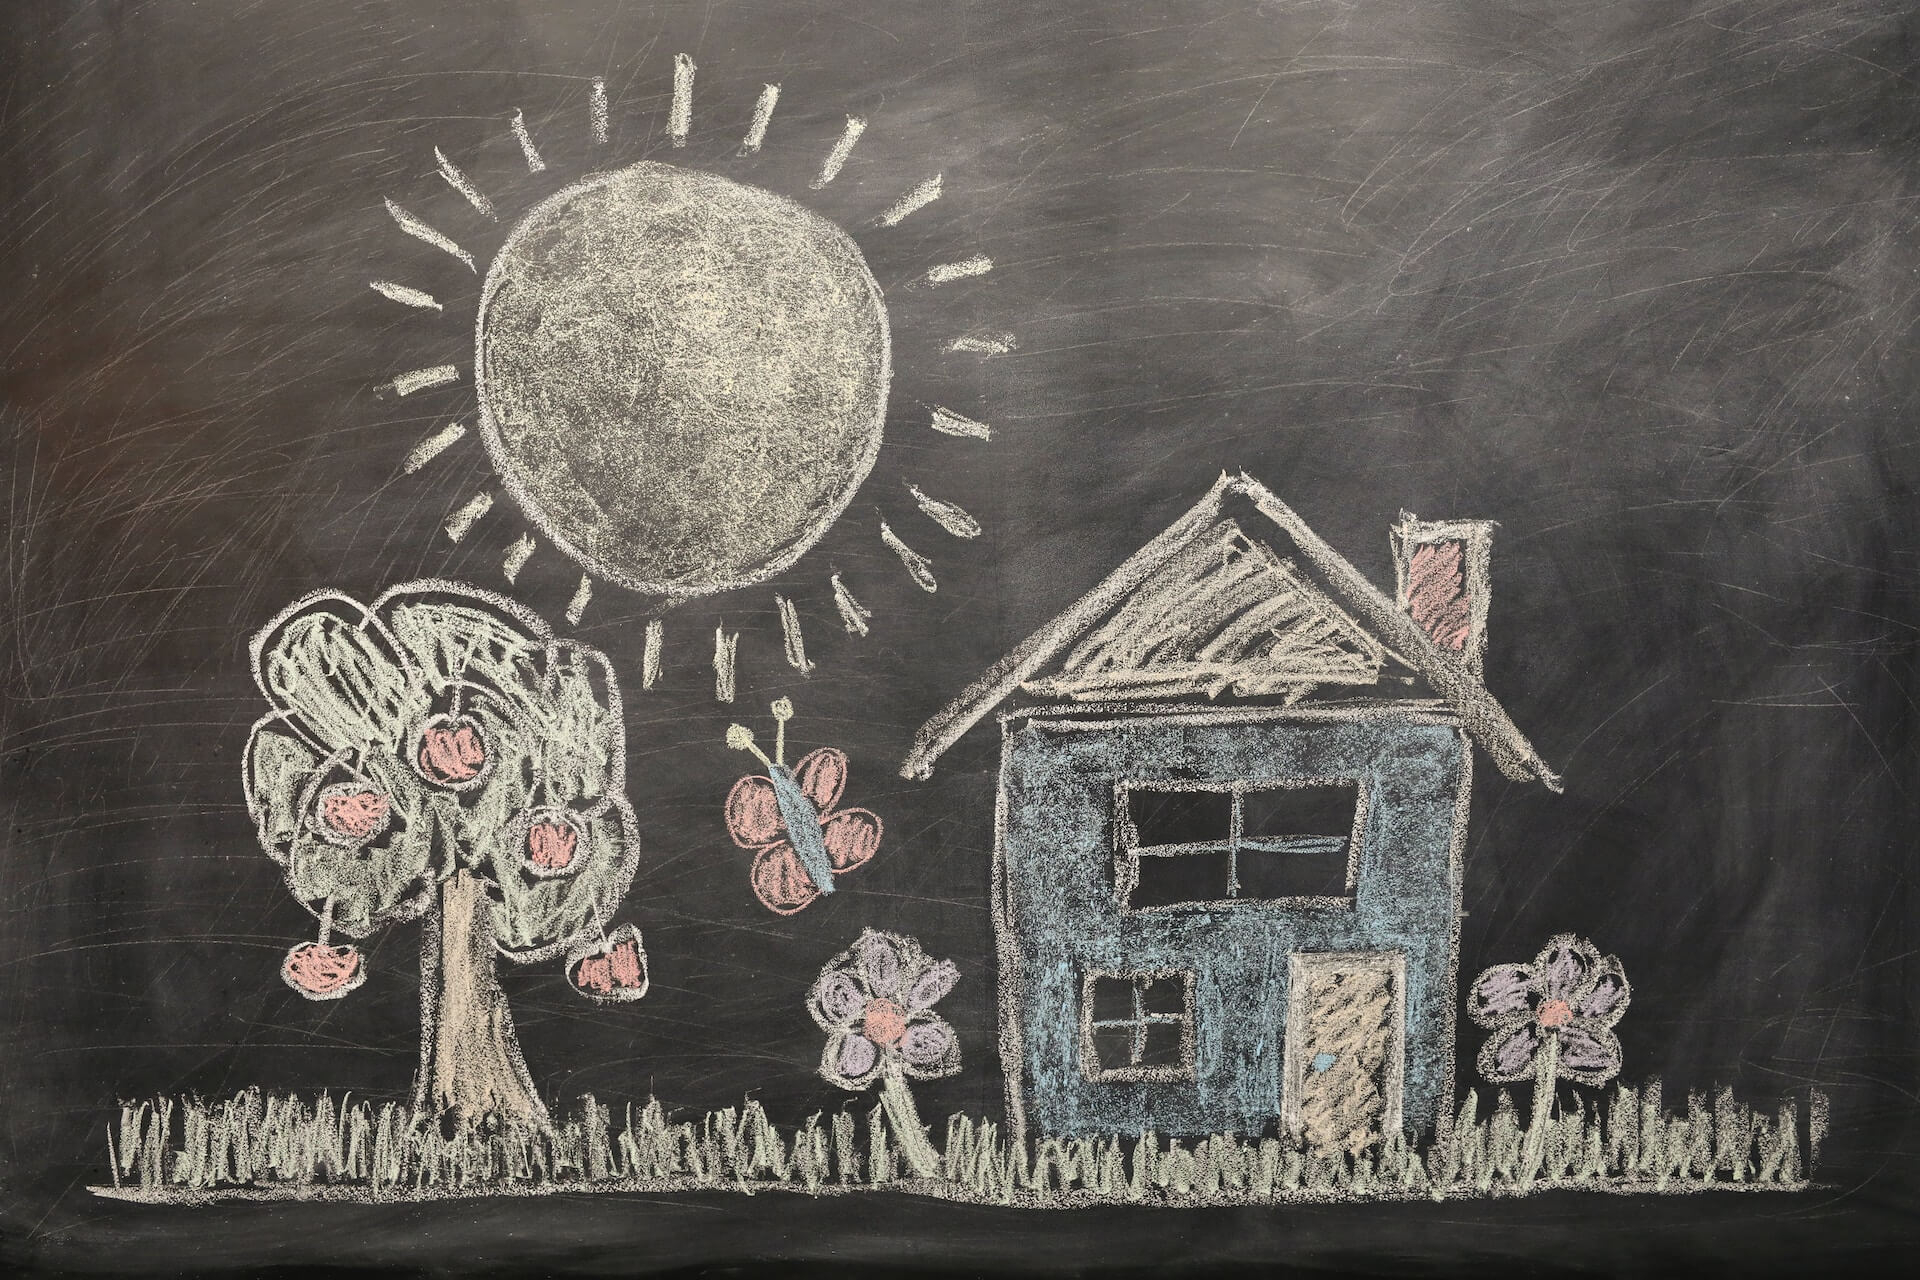 Chalk drawing on a blackboard of a person’s childhood home with trees and a sun